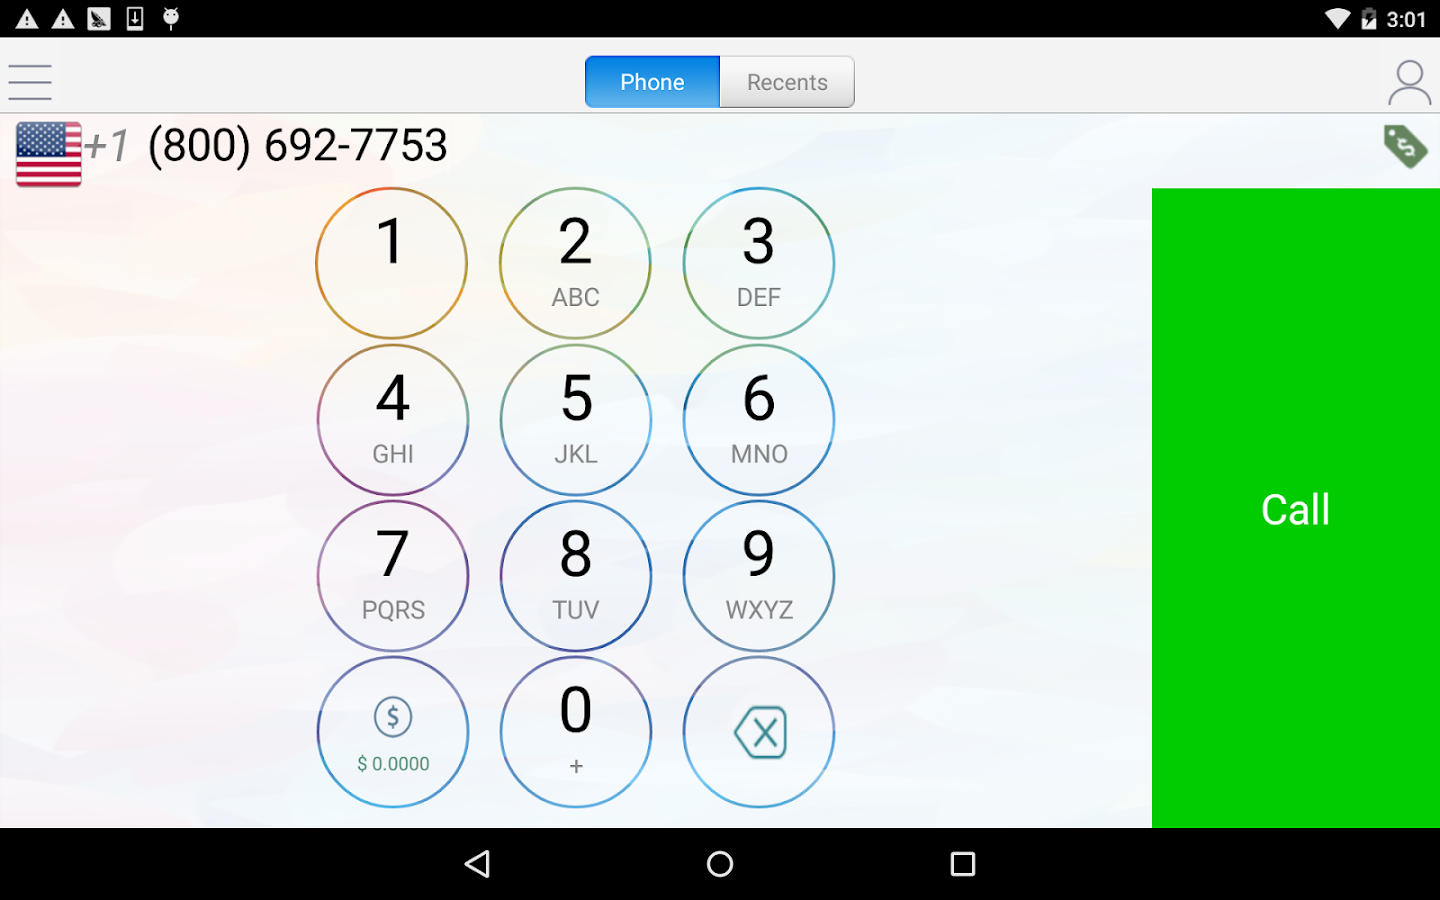 Free Phone Calls, Free Texting - Android Apps on Google Play